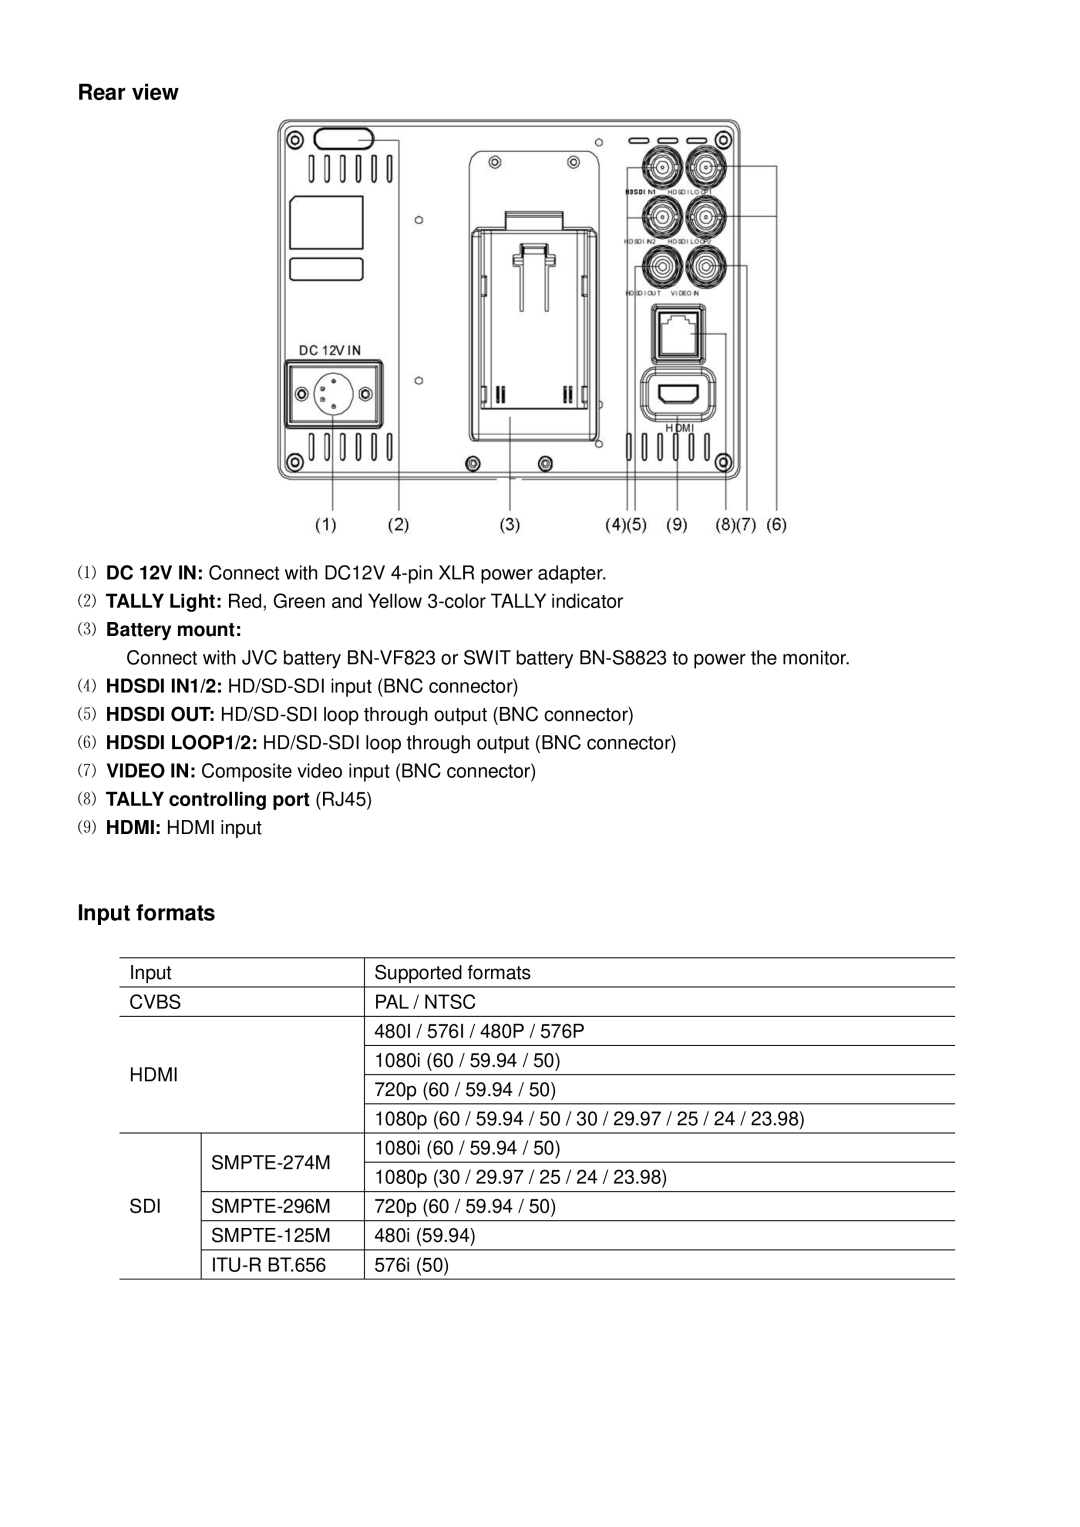 JVC DT-X71F, DT-X71C, DTX71H, DT-X71H user manual Rear view, Input formats, ⑶ Battery mount, ⑻ TALLY controlling port RJ45 